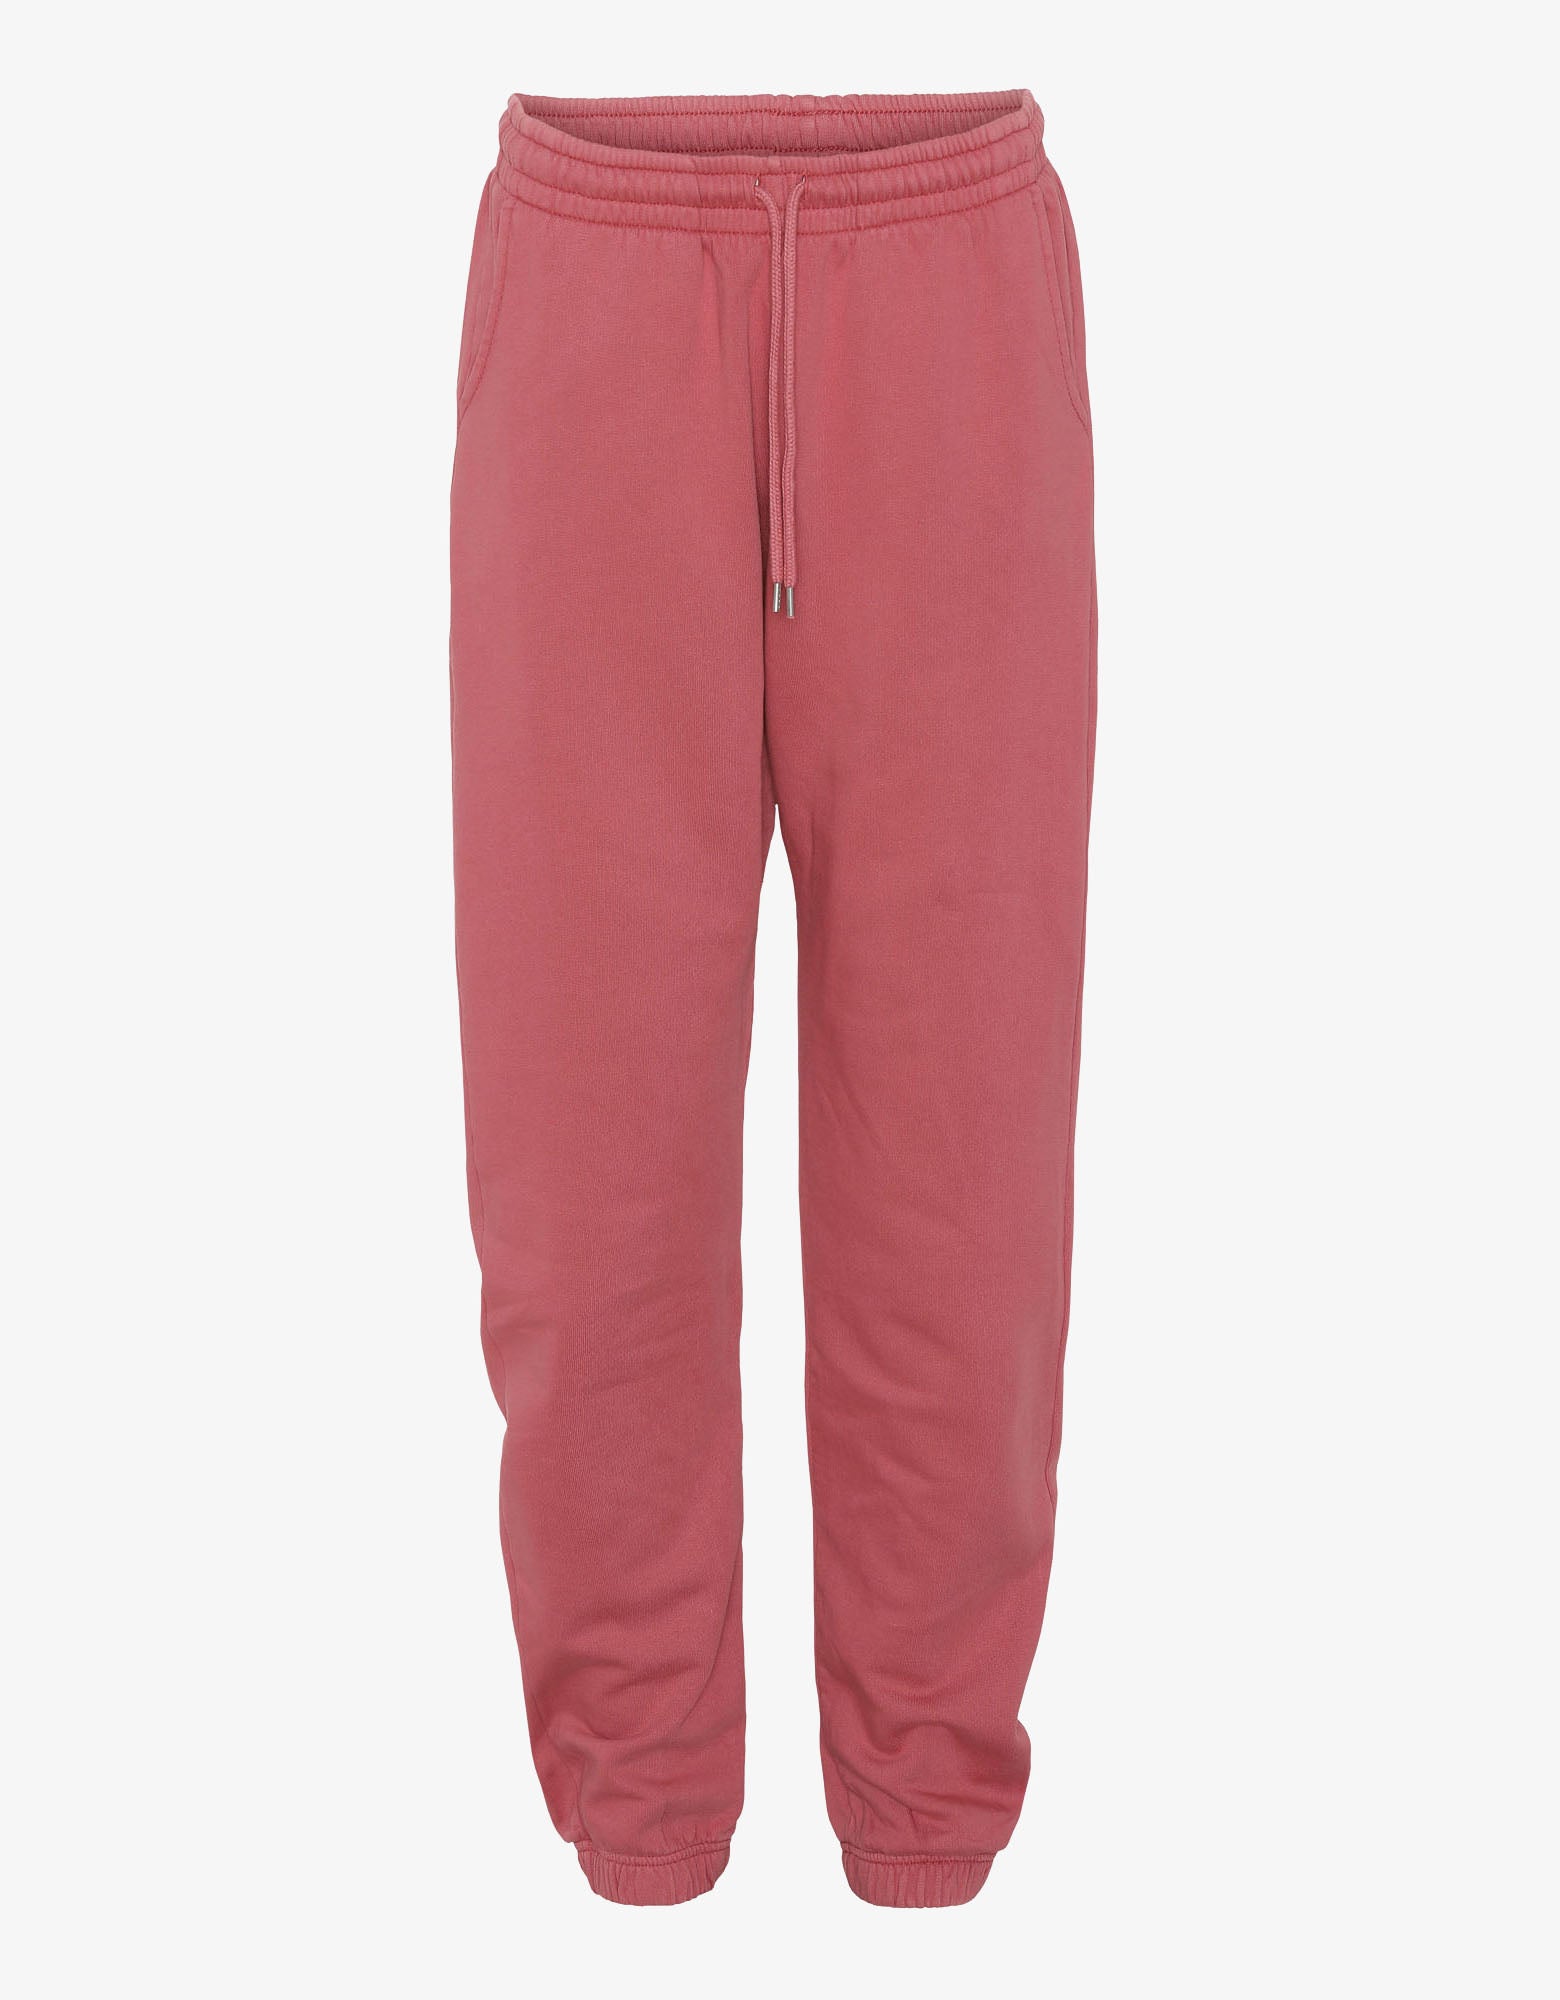 Sweet Tooth Women's Joggers - Raspberry – Shop Cold Stone ™ Creamery